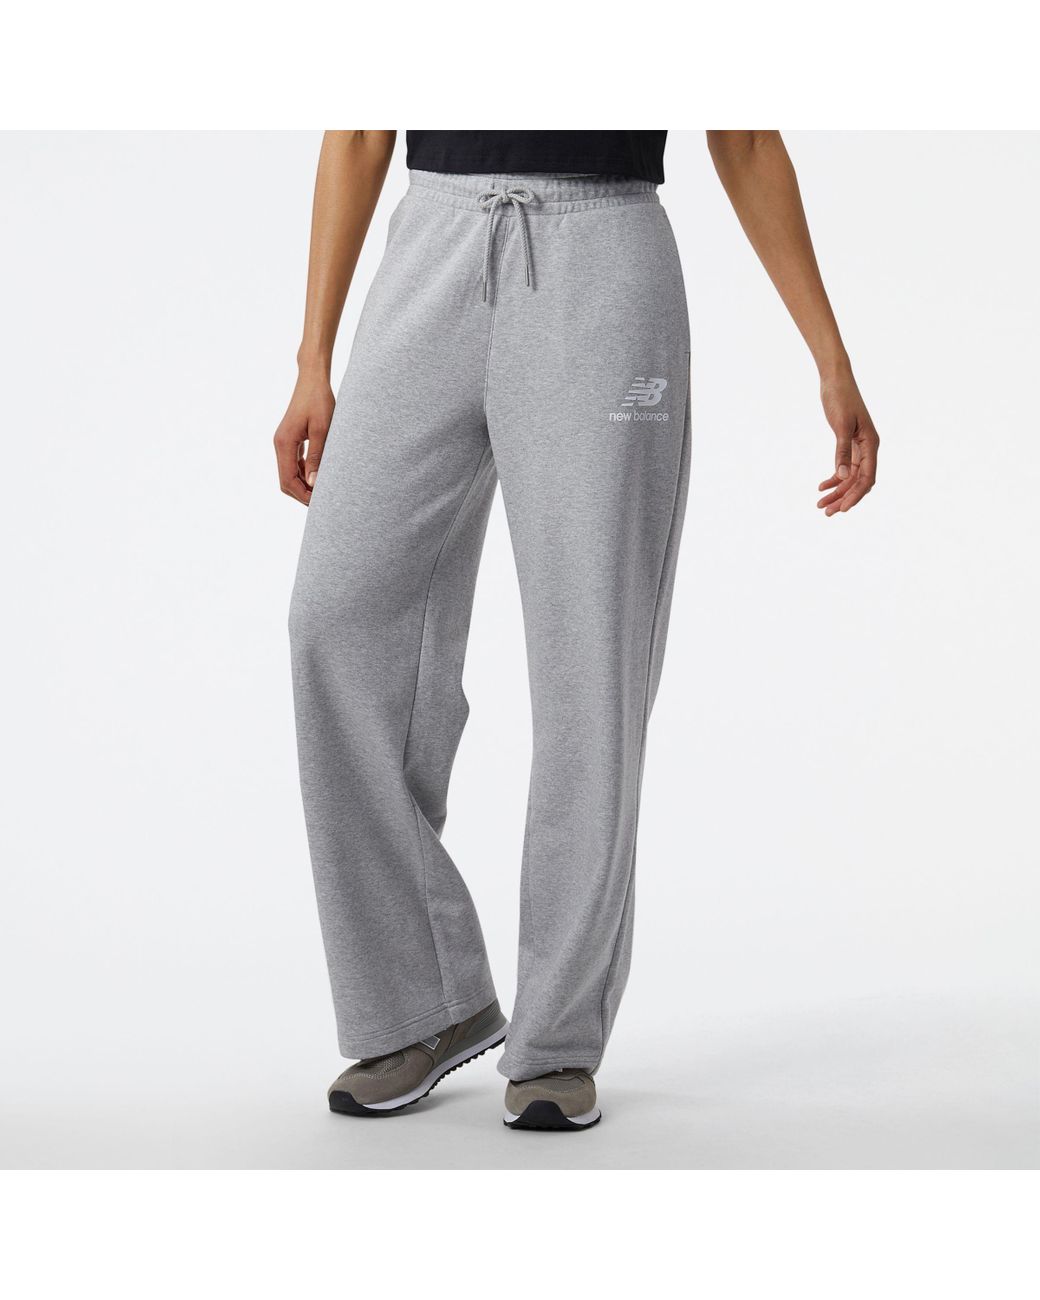 New Balance Essentials Stacked Gray Legged Wide Logo Sweatpant Lyst Terry in | French